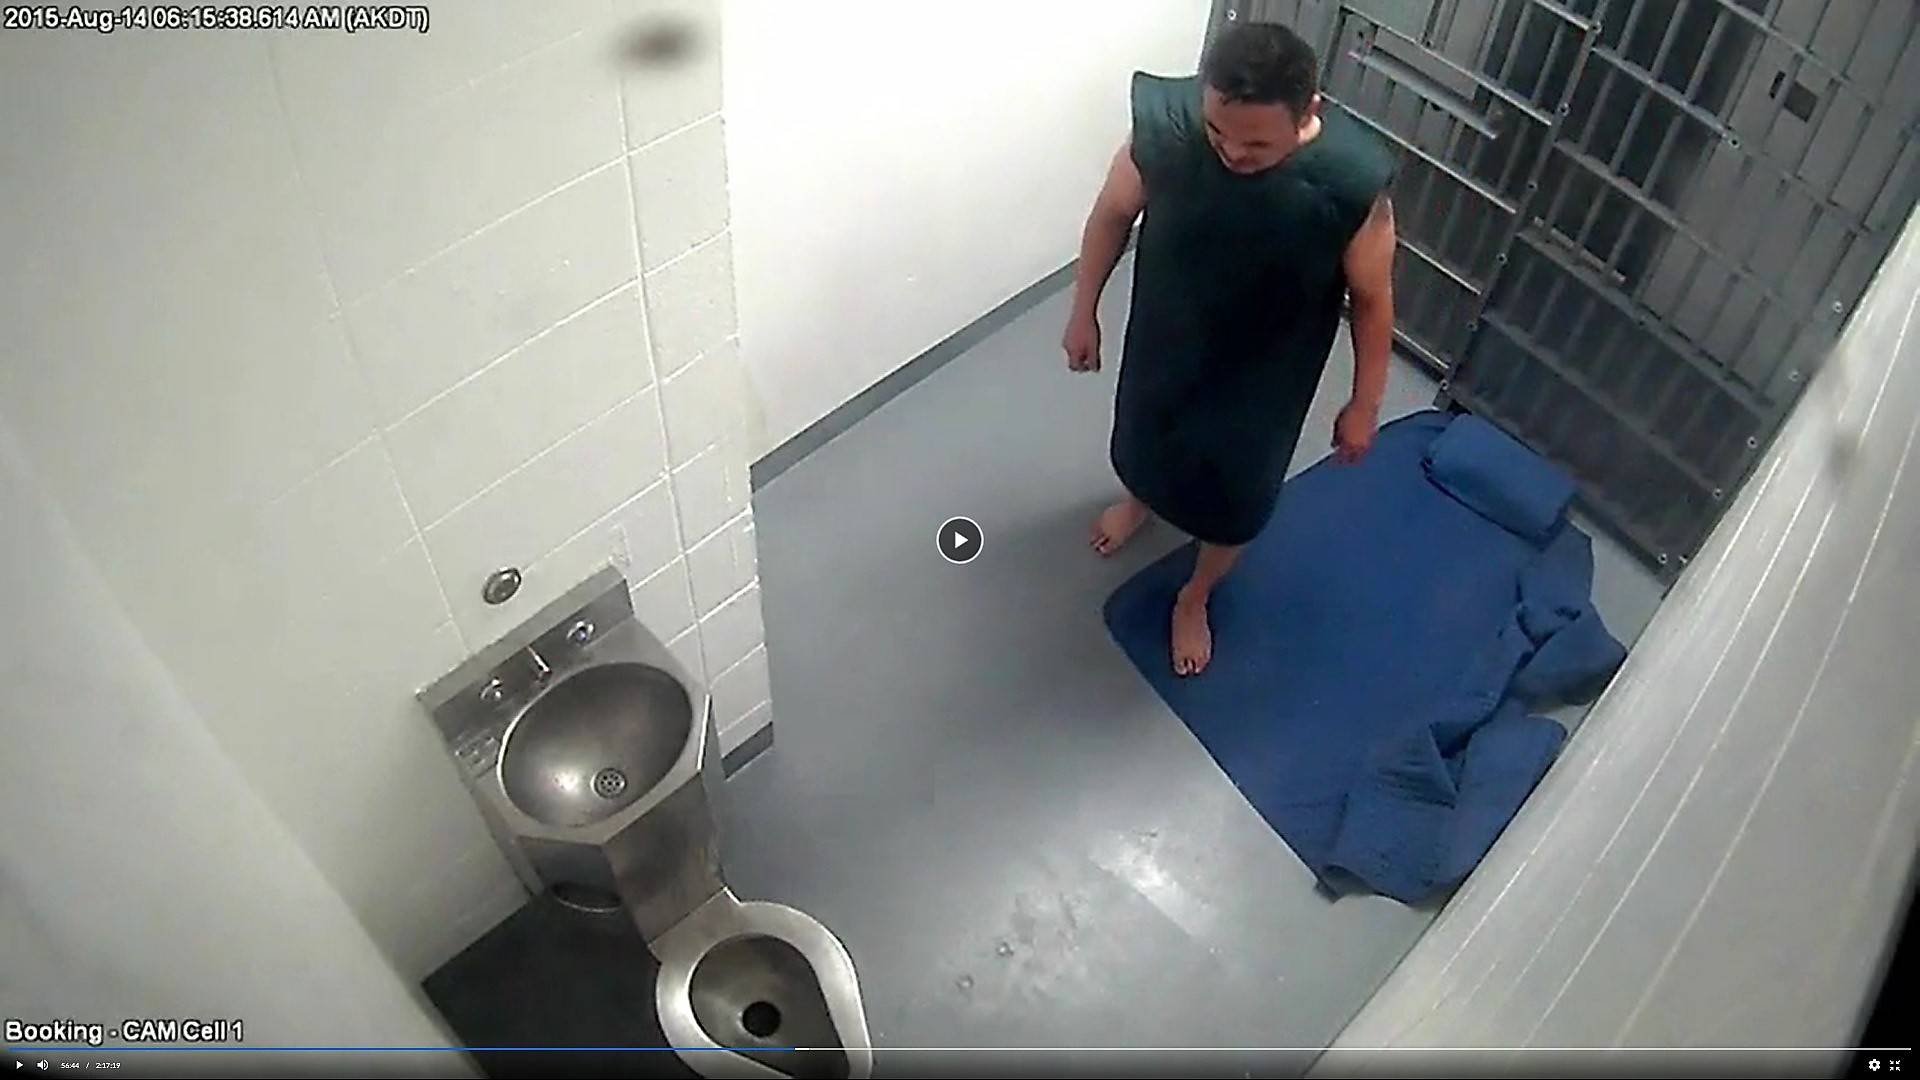 Joseph Murphy is seen pacing in his cell at Lemon Creek Correctional Center just a few minutes before he collapsed and died on Aug. 14, 2015. (Screenshot courtesy of Mark Choate)